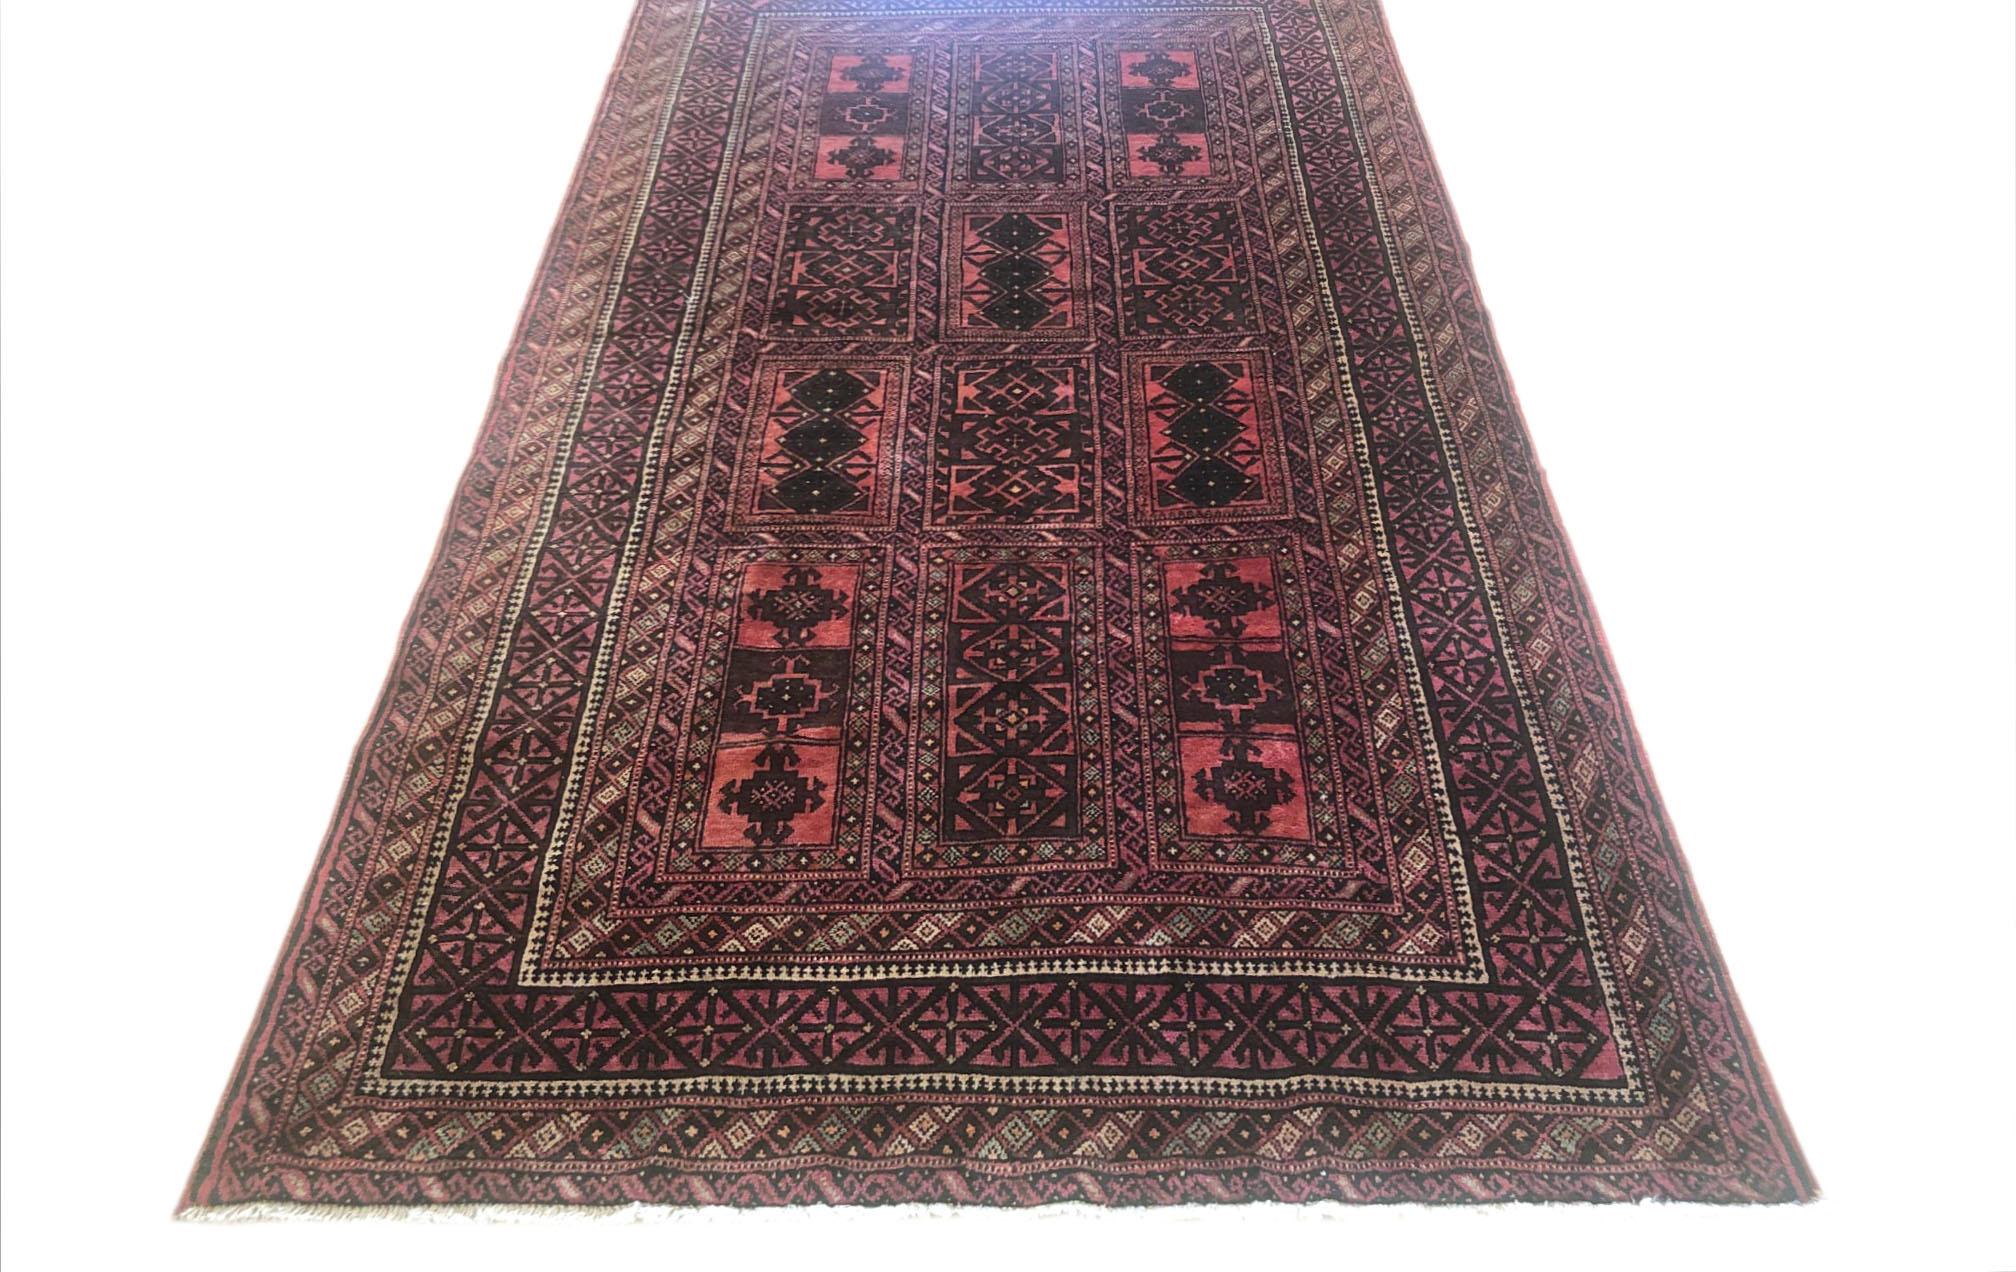 This authentic Persian Baluchi rug has wool pile and foundation which are hand knotted by the nomads of Baluchi. The age of this rug is almost 50 years old. The base color is salmon and the border colors are brown and salmon. The size of this rug is